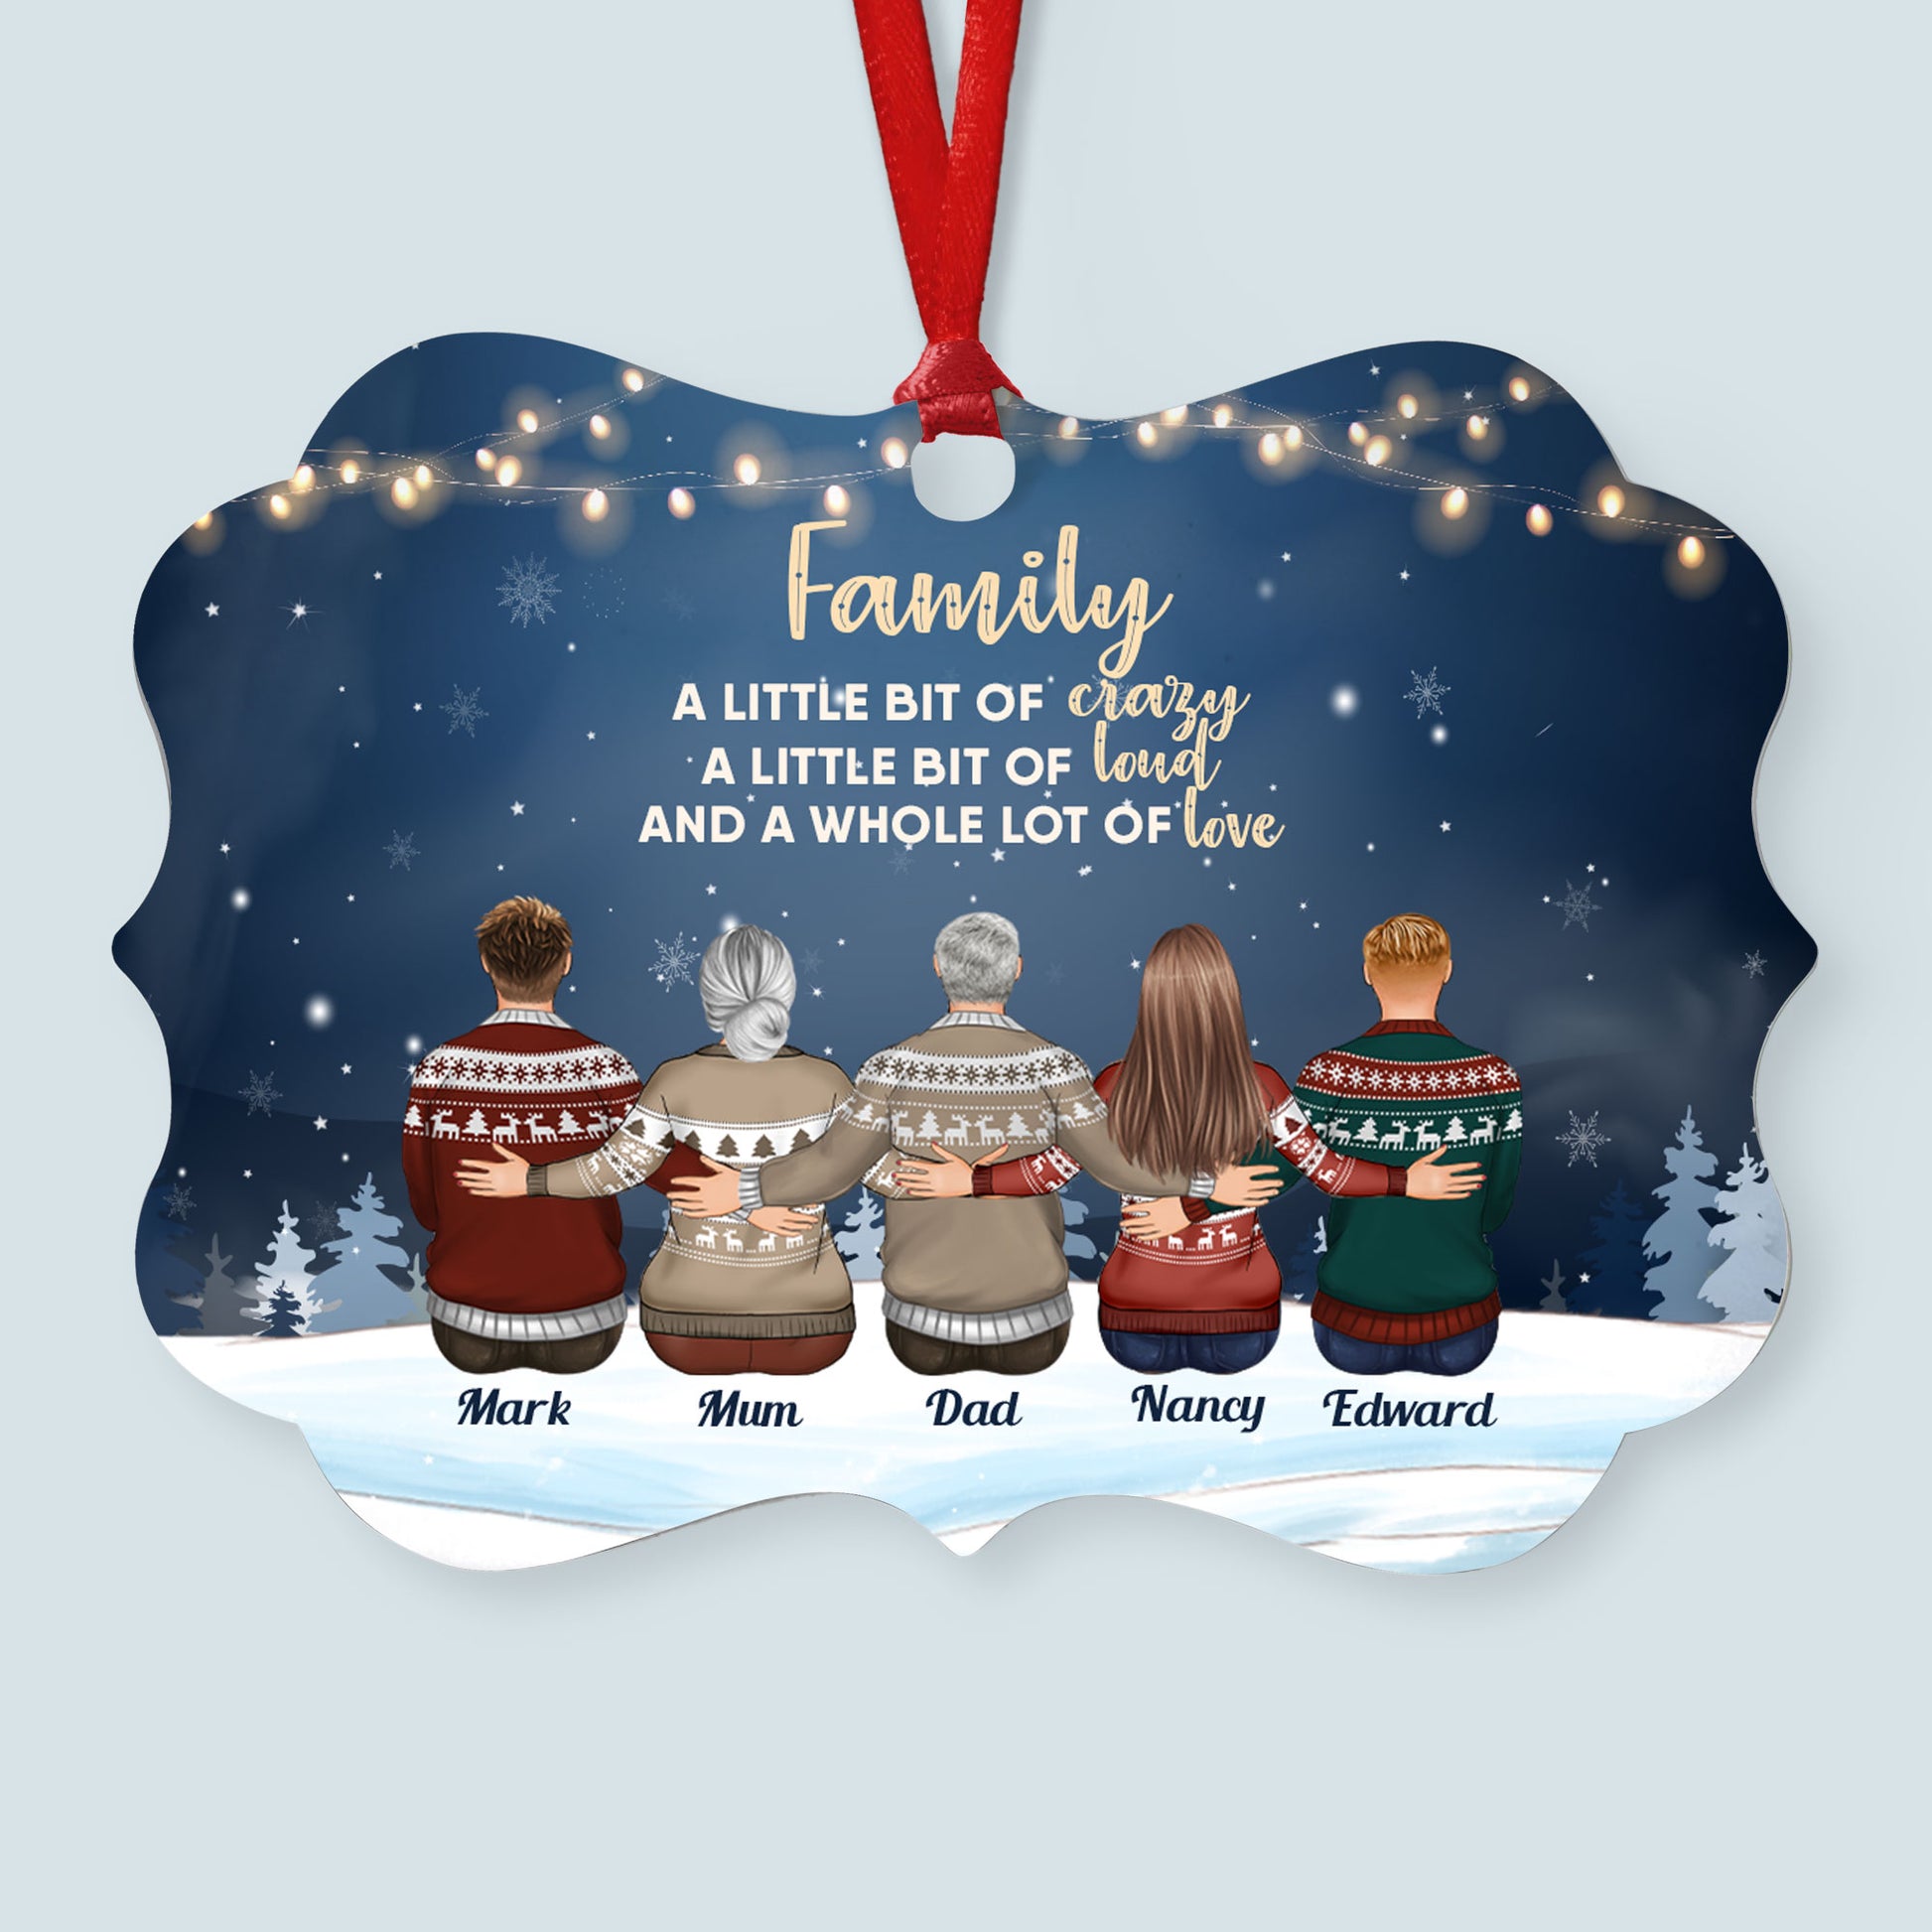 Family Never Apart - Personalized Aluminum Ornament - Christmas Gift Family Ornament For Dad, Mom, Siblings - Family Hugging